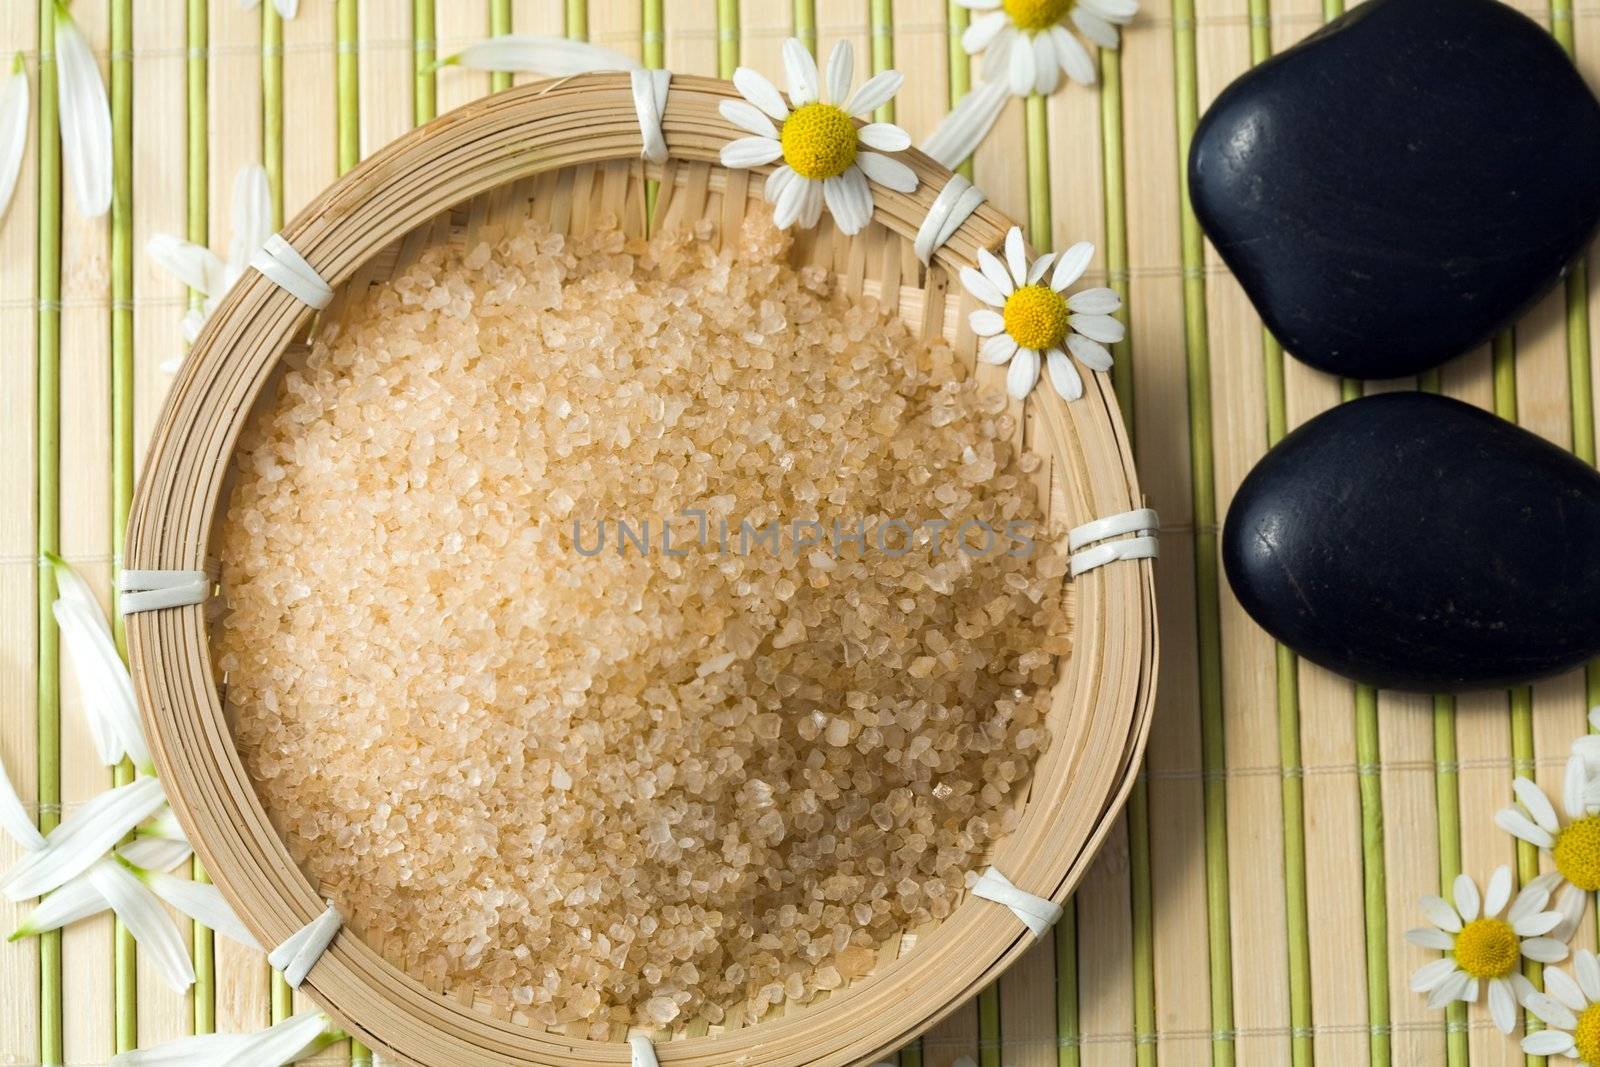 An image of bathing salt and stones for spa massage